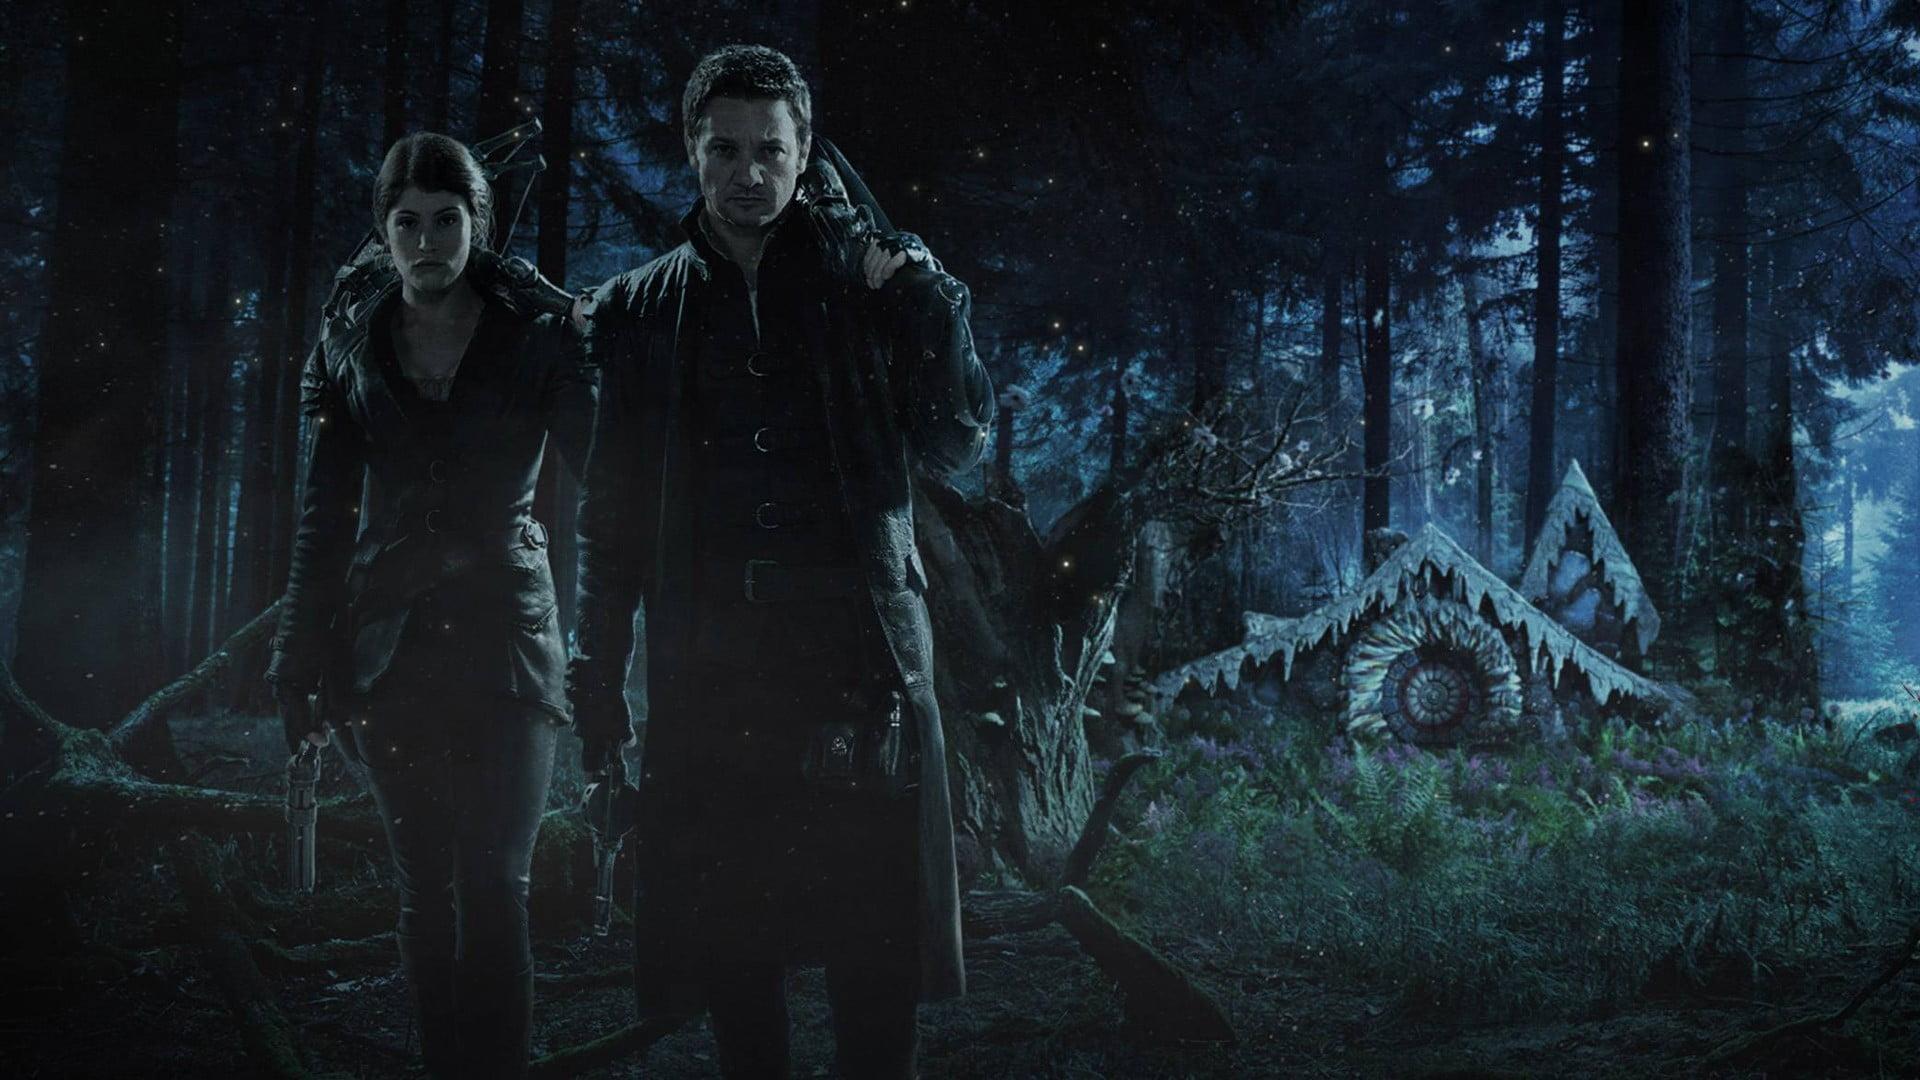 Movie characters wallpaper, Hansel and Gretel: Witch Hunters